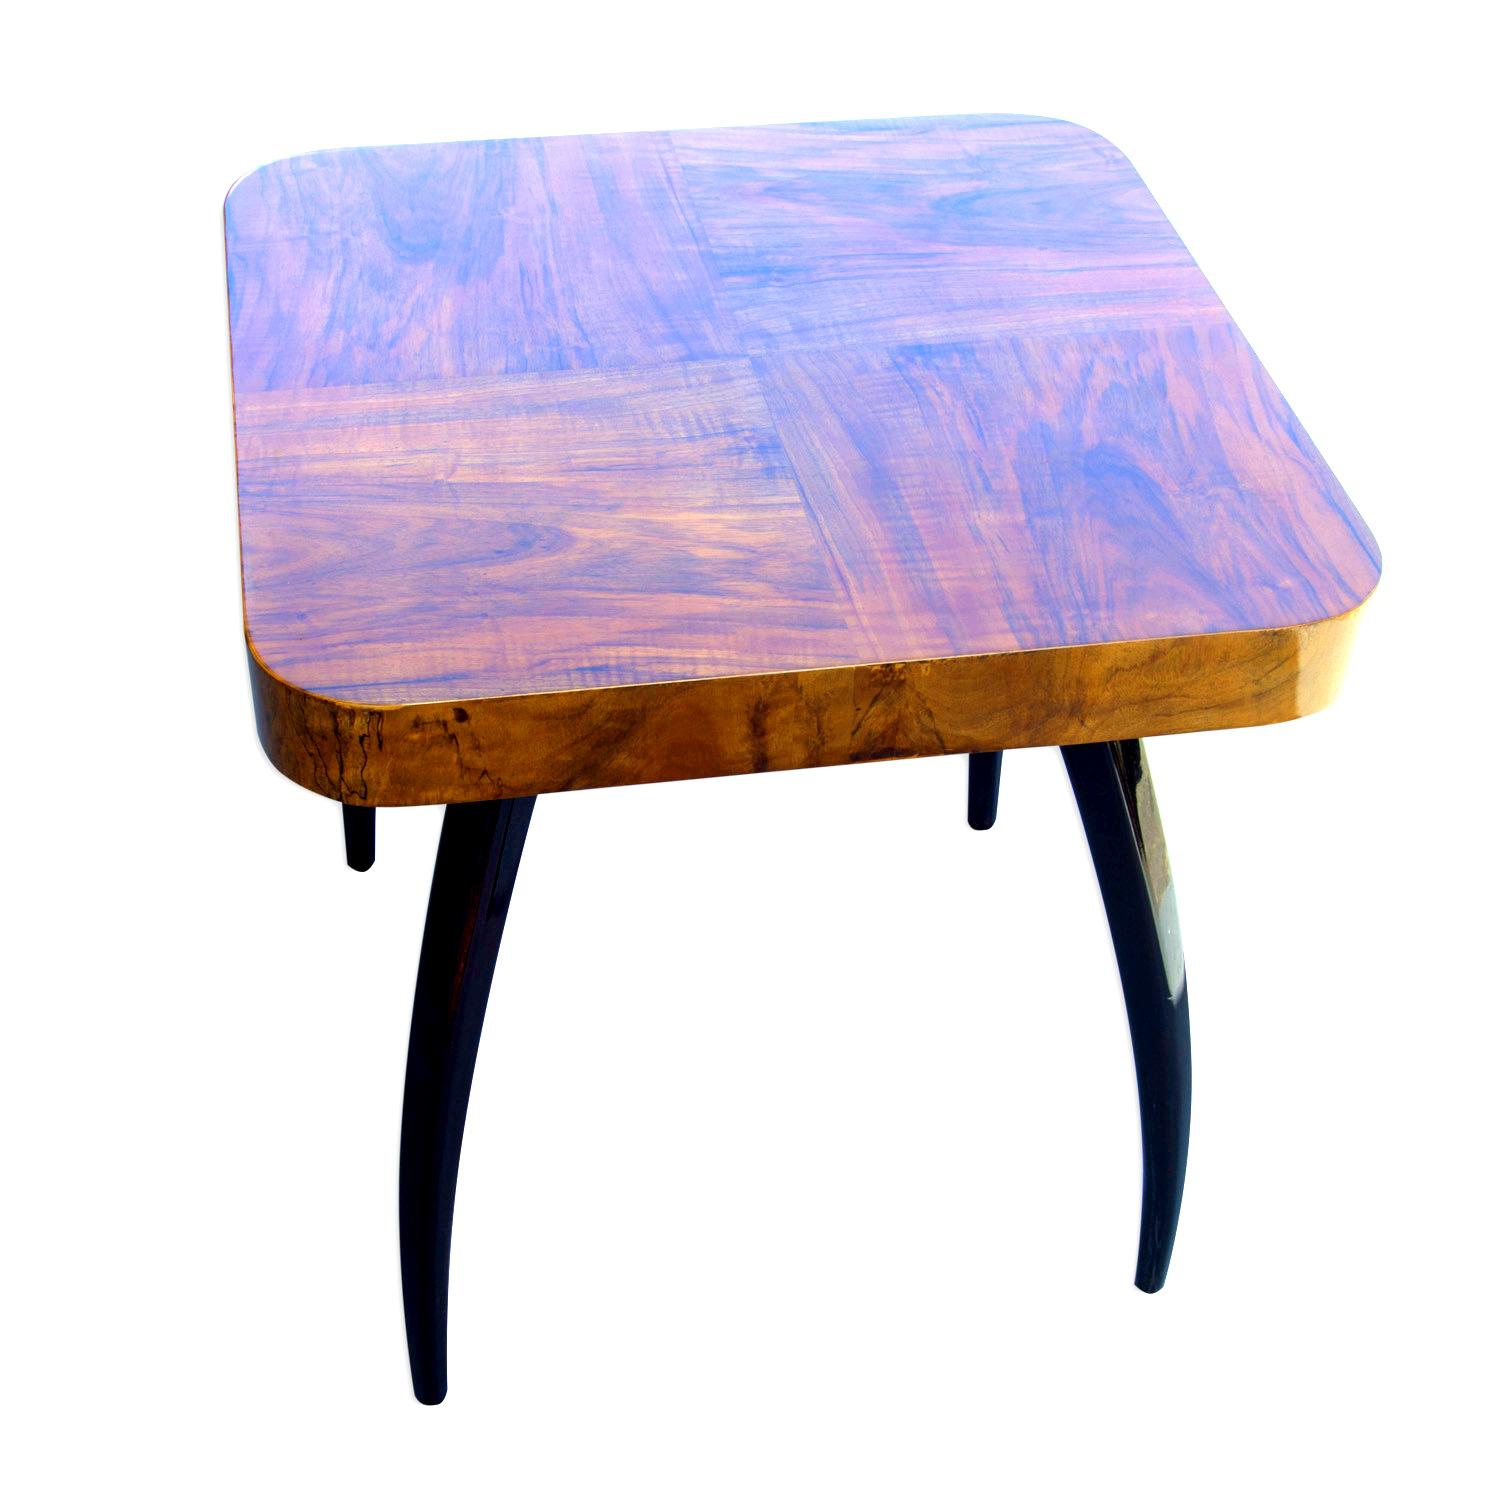 This walnut table called spider was designed by the world famous architect Jindrich Halabala under catalog No. H-259 in the 1930s and produced in the 1950s. Unique style of this table is recognized all over the world. The table stands on four legs